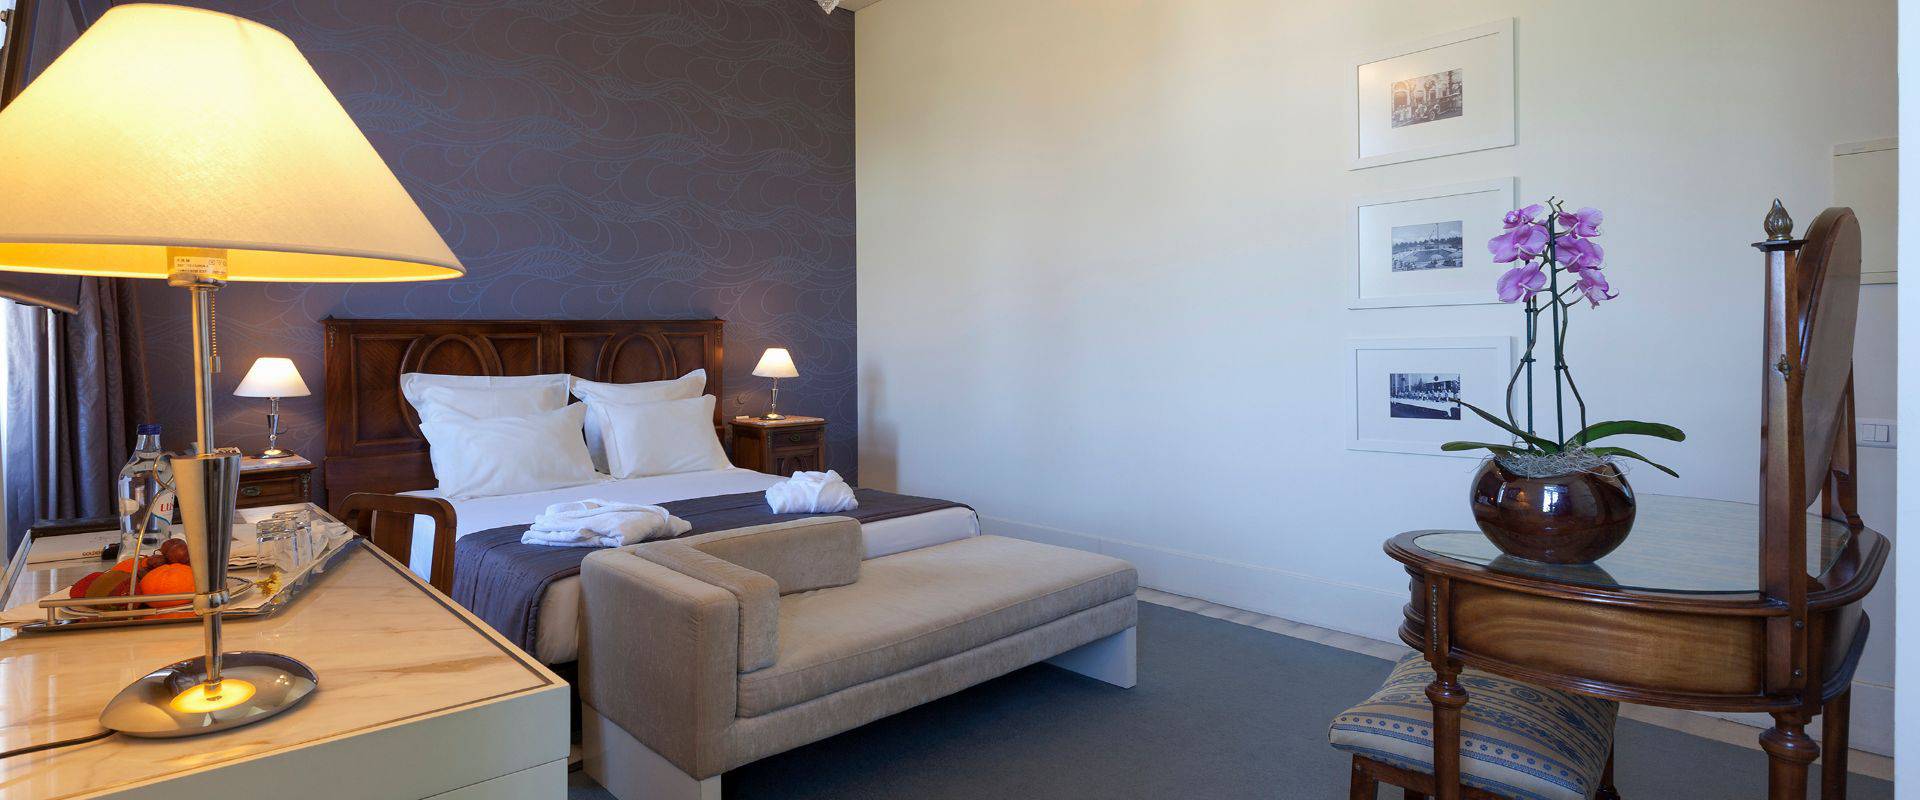 Classic room with an individual bed and interior pateo view  Curia Palace Hotel Coimbra